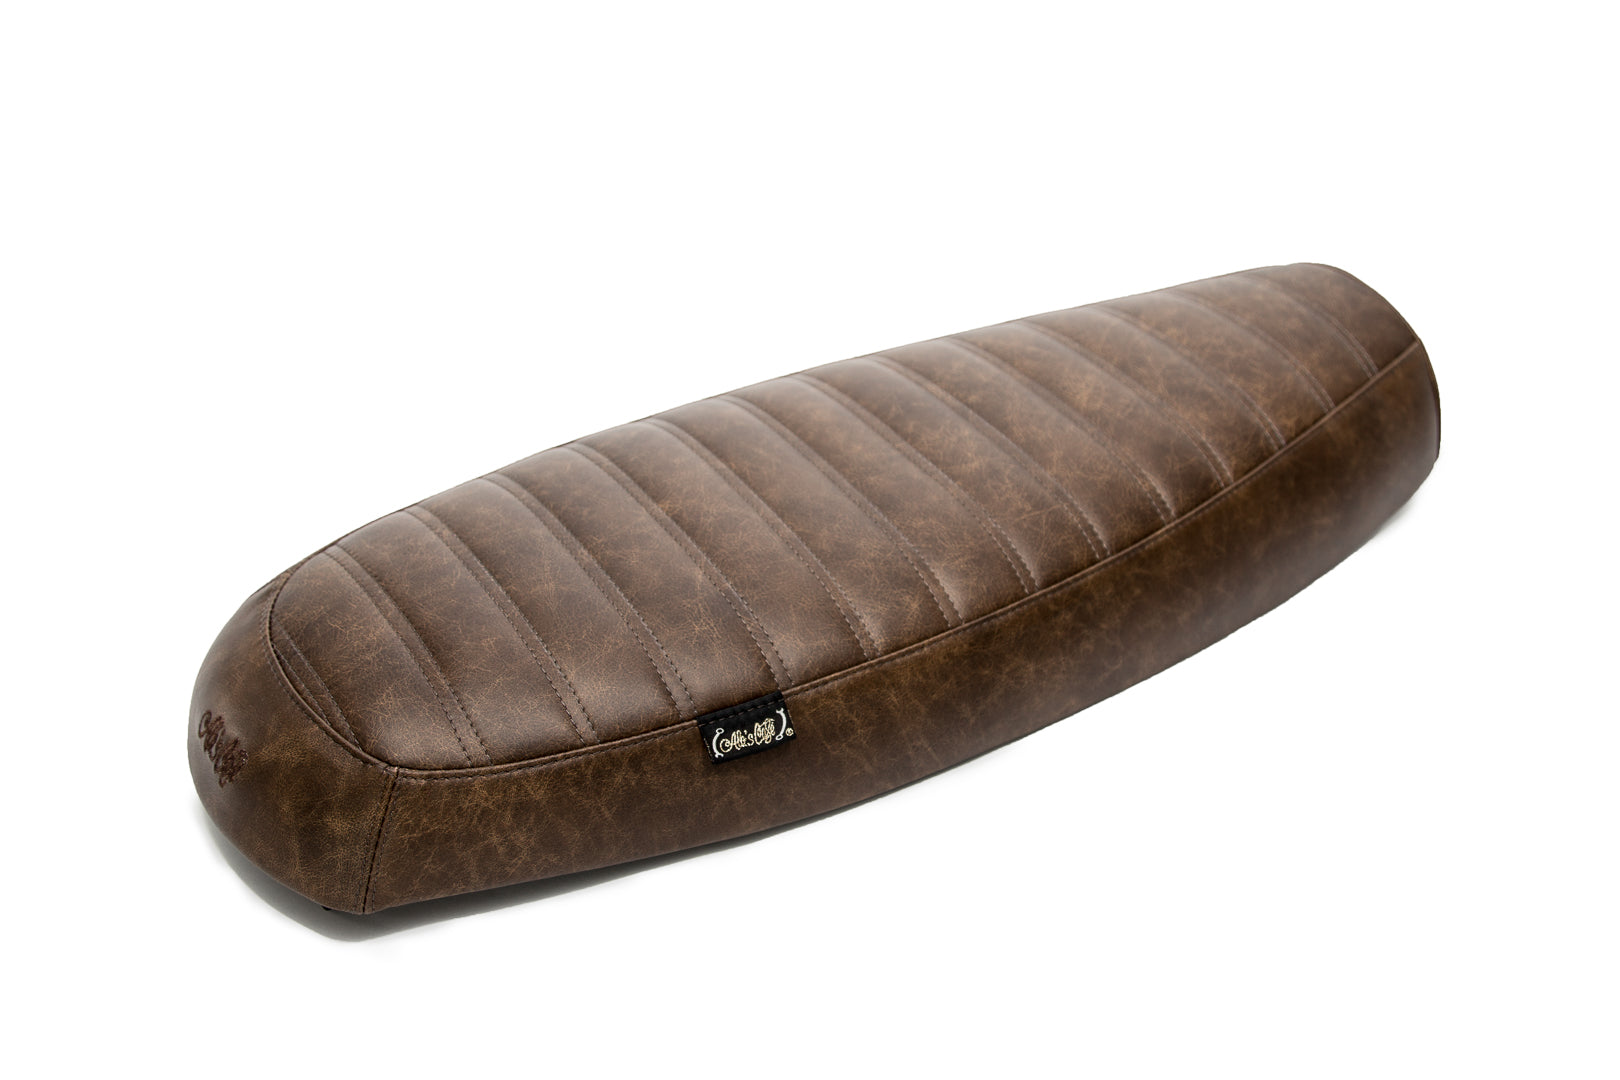 The "Essential" Tuck n Roll Leather Slim Seat - Brown